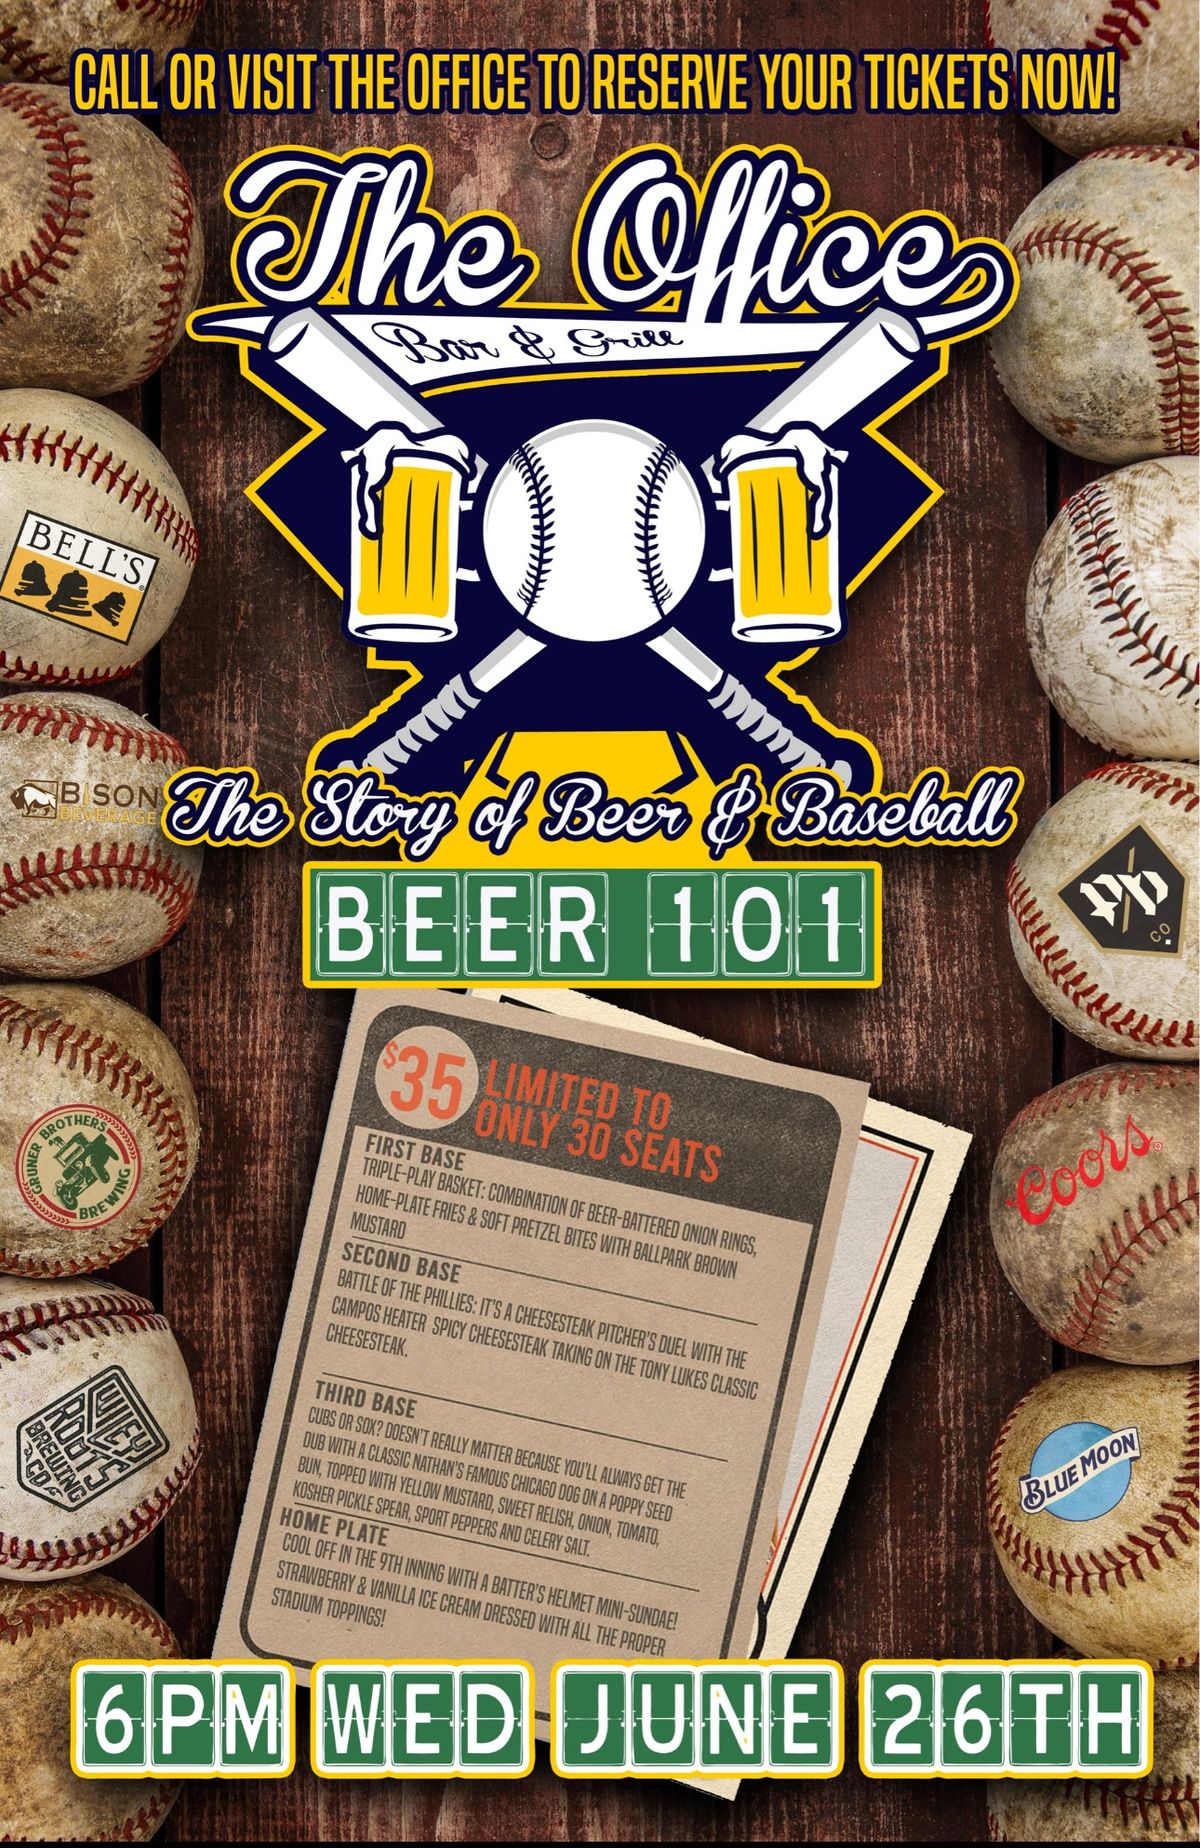 Beer 101: The Story of Beer and Baseball